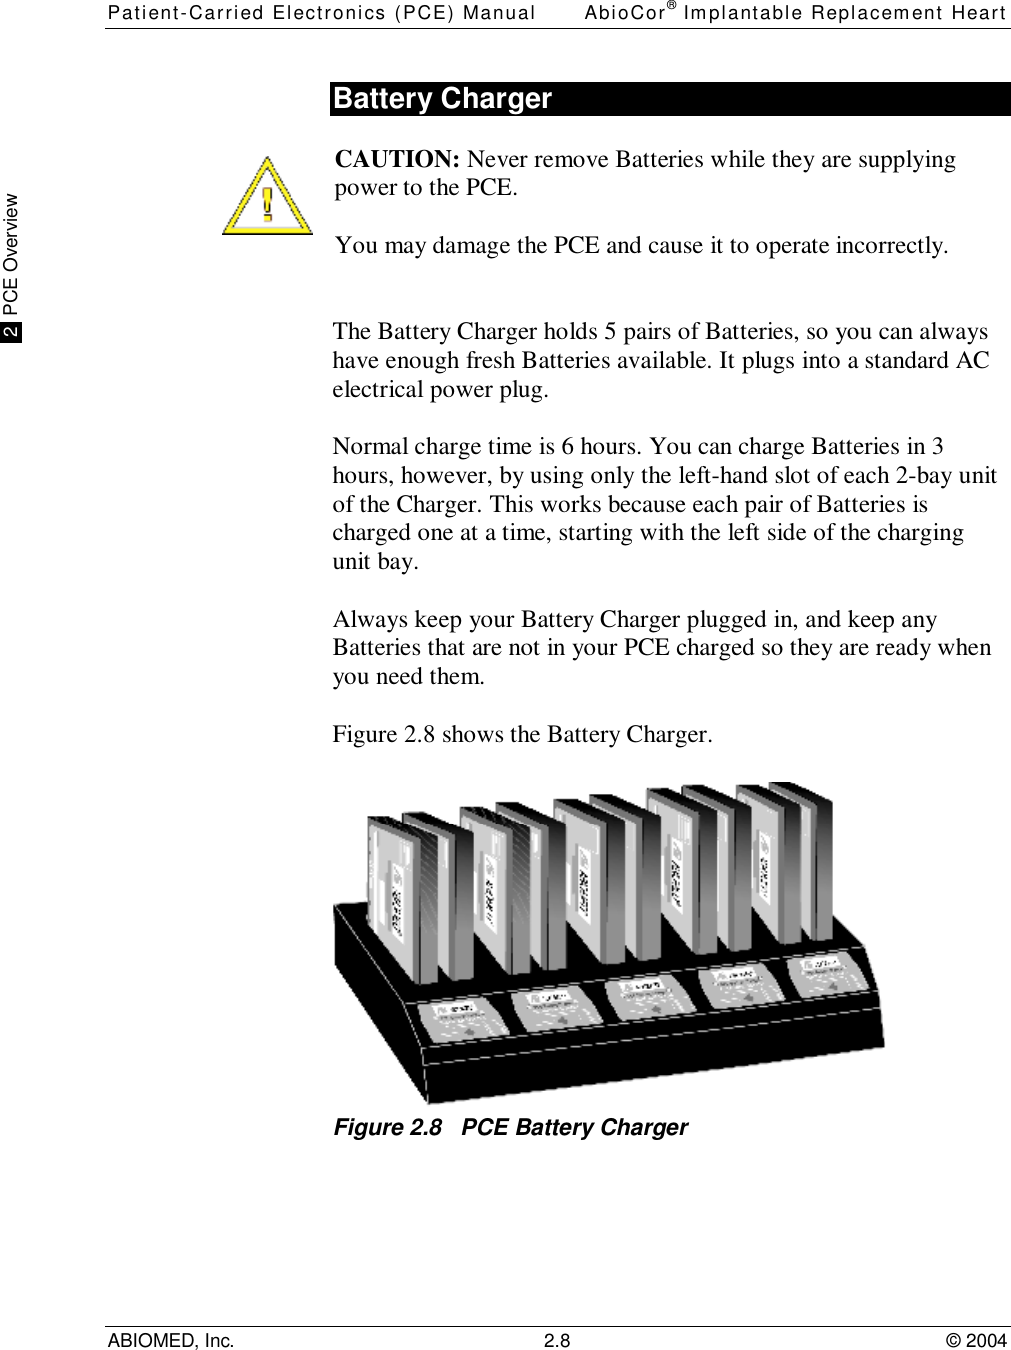 Patient-Carried Electronics (PCE) Manual AbioCor® Implantable Replacement HeartABIOMED, Inc. 2.8 © 2004 2  PCE OverviewBattery ChargerCAUTION: Never remove Batteries while they are supplyingpower to the PCE.You may damage the PCE and cause it to operate incorrectly.The Battery Charger holds 5 pairs of Batteries, so you can alwayshave enough fresh Batteries available. It plugs into a standard ACelectrical power plug.Normal charge time is 6 hours. You can charge Batteries in 3hours, however, by using only the left-hand slot of each 2-bay unitof the Charger. This works because each pair of Batteries ischarged one at a time, starting with the left side of the chargingunit bay.Always keep your Battery Charger plugged in, and keep anyBatteries that are not in your PCE charged so they are ready whenyou need them.Figure 2.8 shows the Battery Charger.Figure 2.8   PCE Battery Charger